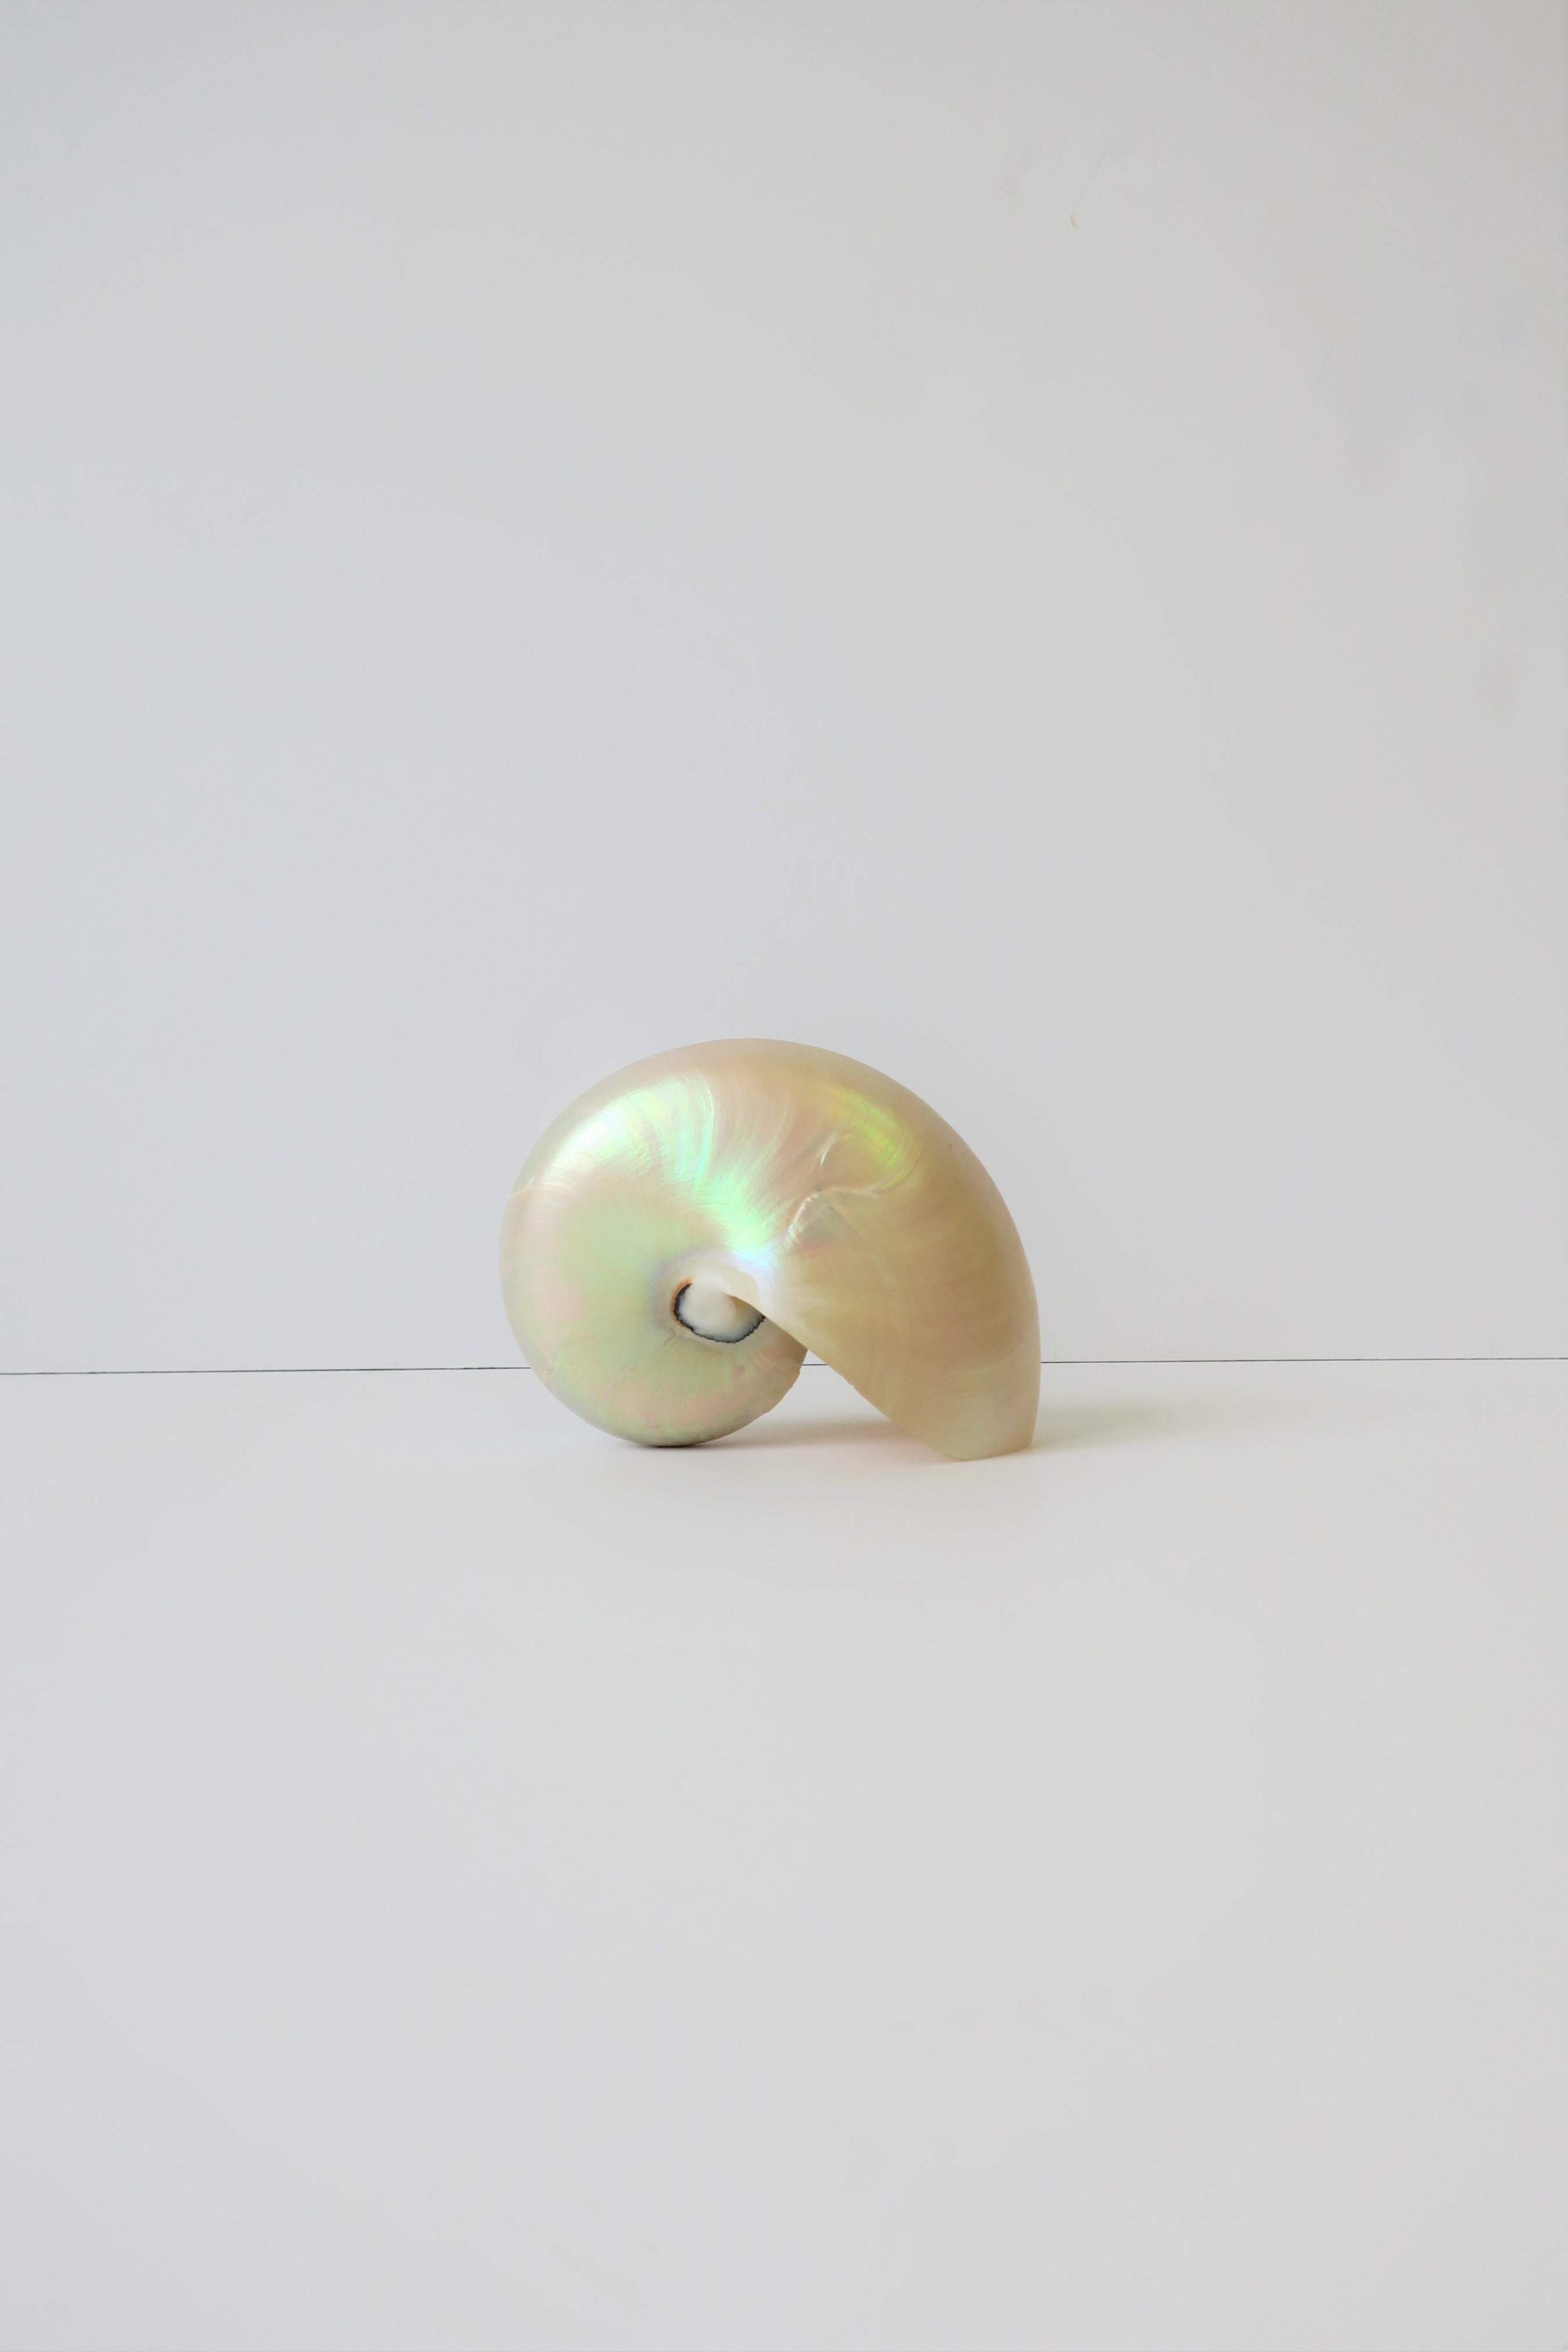 A very beautiful white Mother-of-Pearl nautilus seashell in the style of organic modern, circa 20th century or earlier. 

Nautilus Seashell measures: 2.75